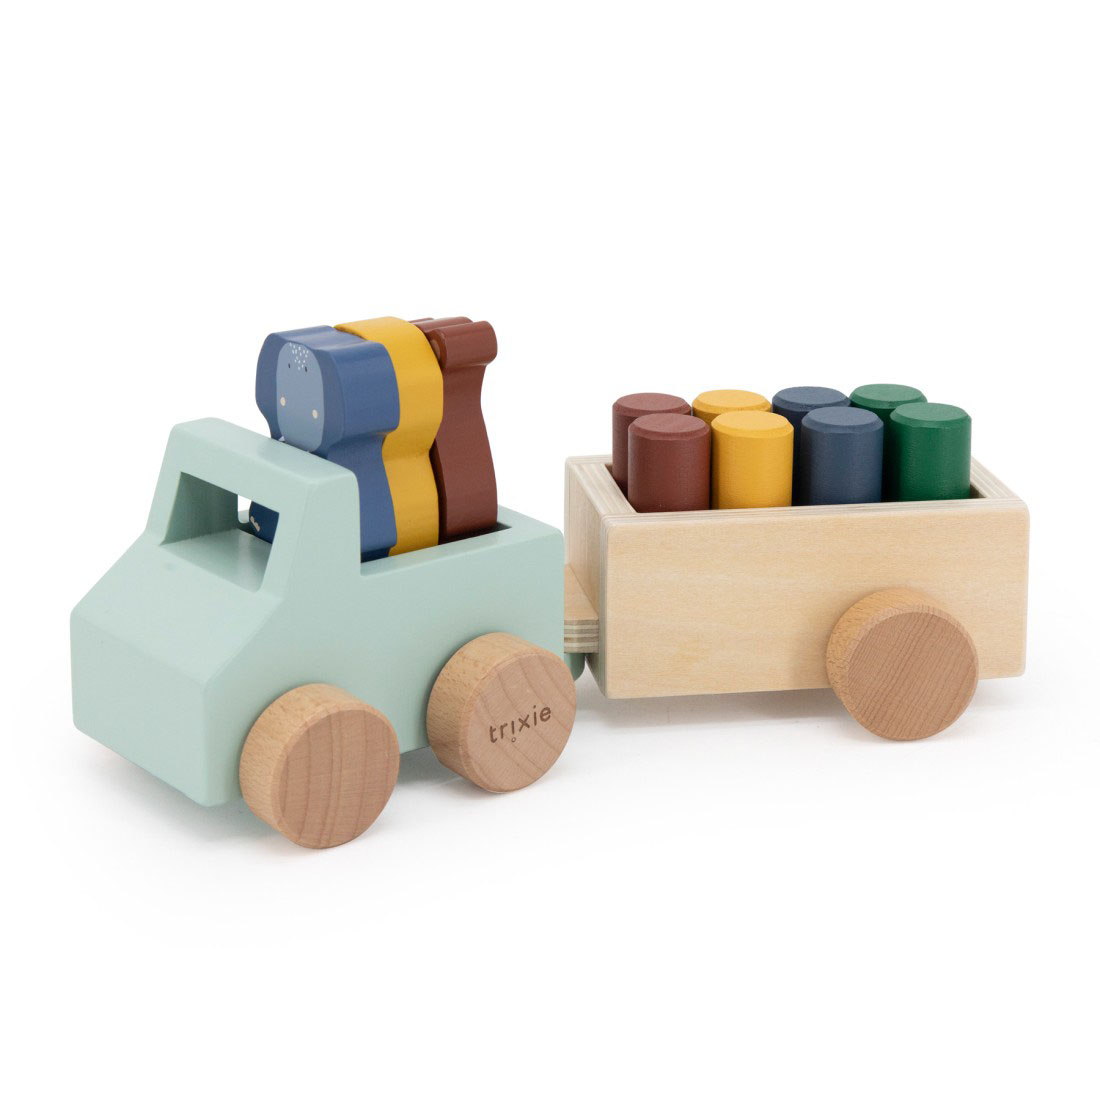 Trixie Wooden animal car with trailer